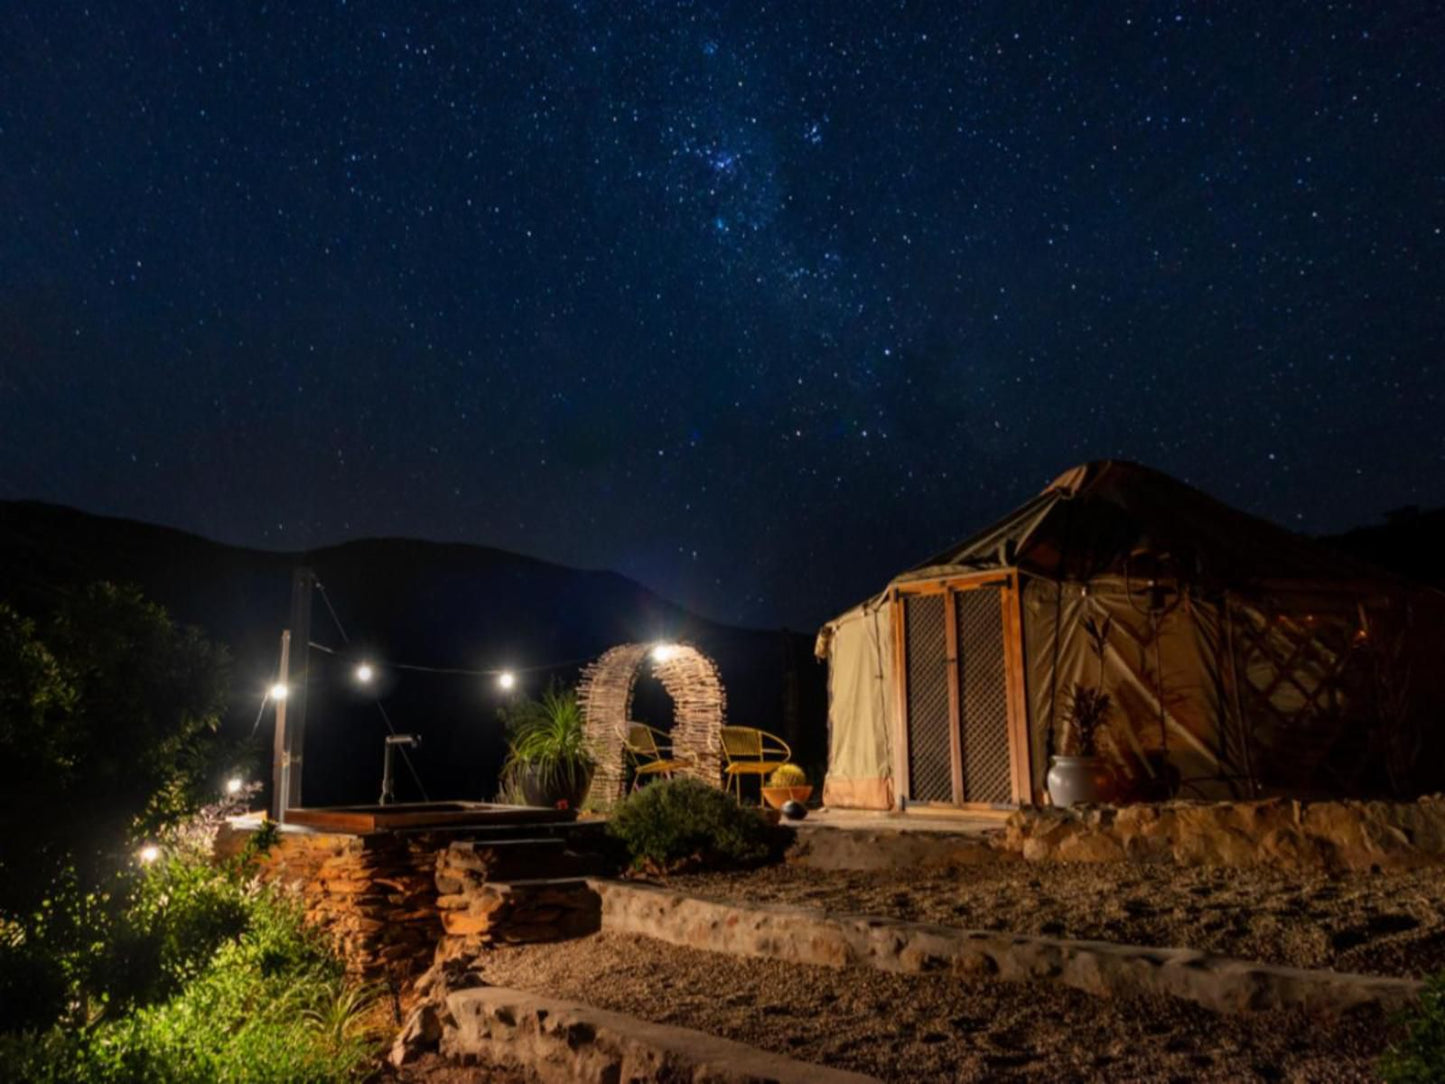 Southern Yurts Bot River Western Cape South Africa Tent, Architecture, Night Sky, Nature